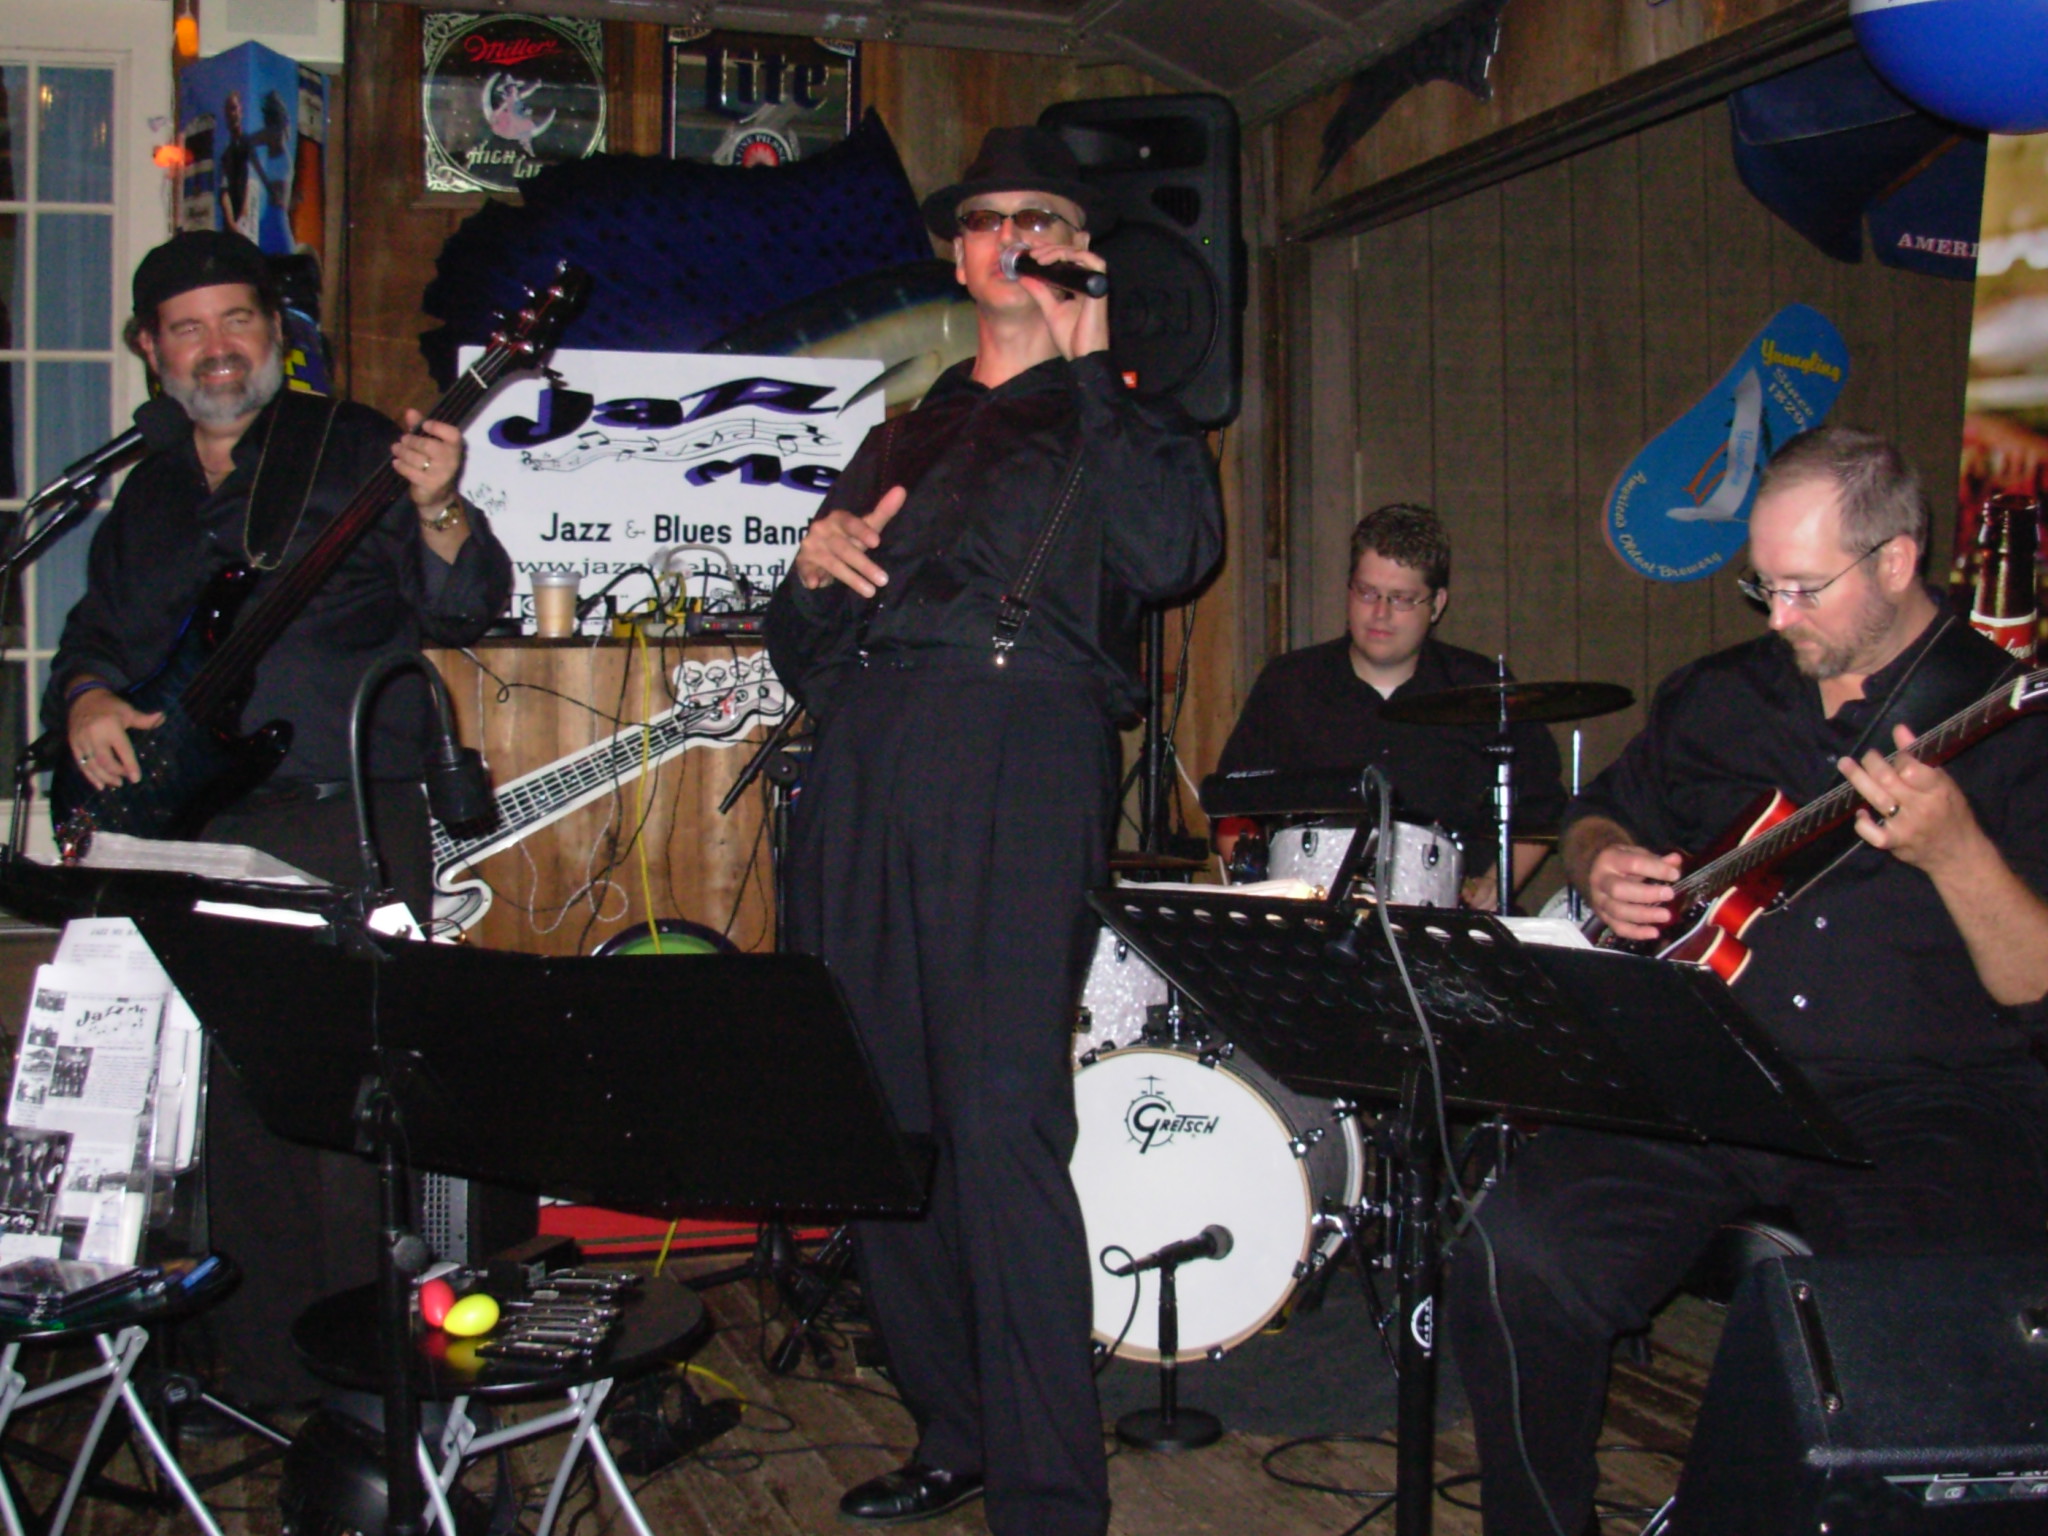 Playing at the Carsonville Hotel Sept 2007
